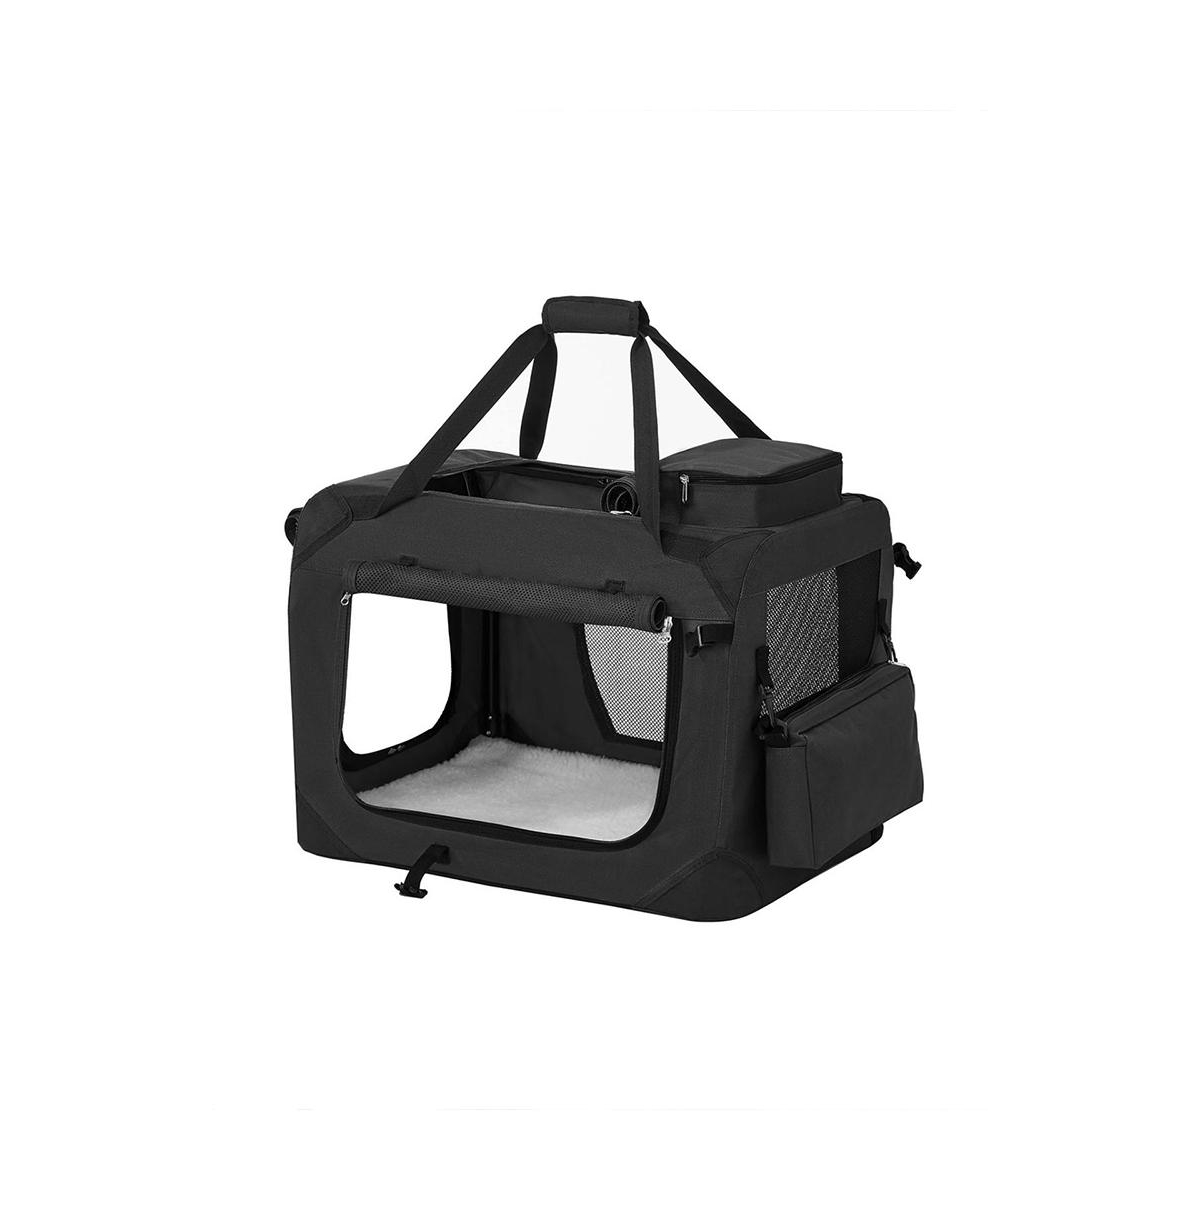 Collapsible Pet Carrier, Oxford Fabric, Mesh, Metal Frame, With Handle, Storage Pockets - Black